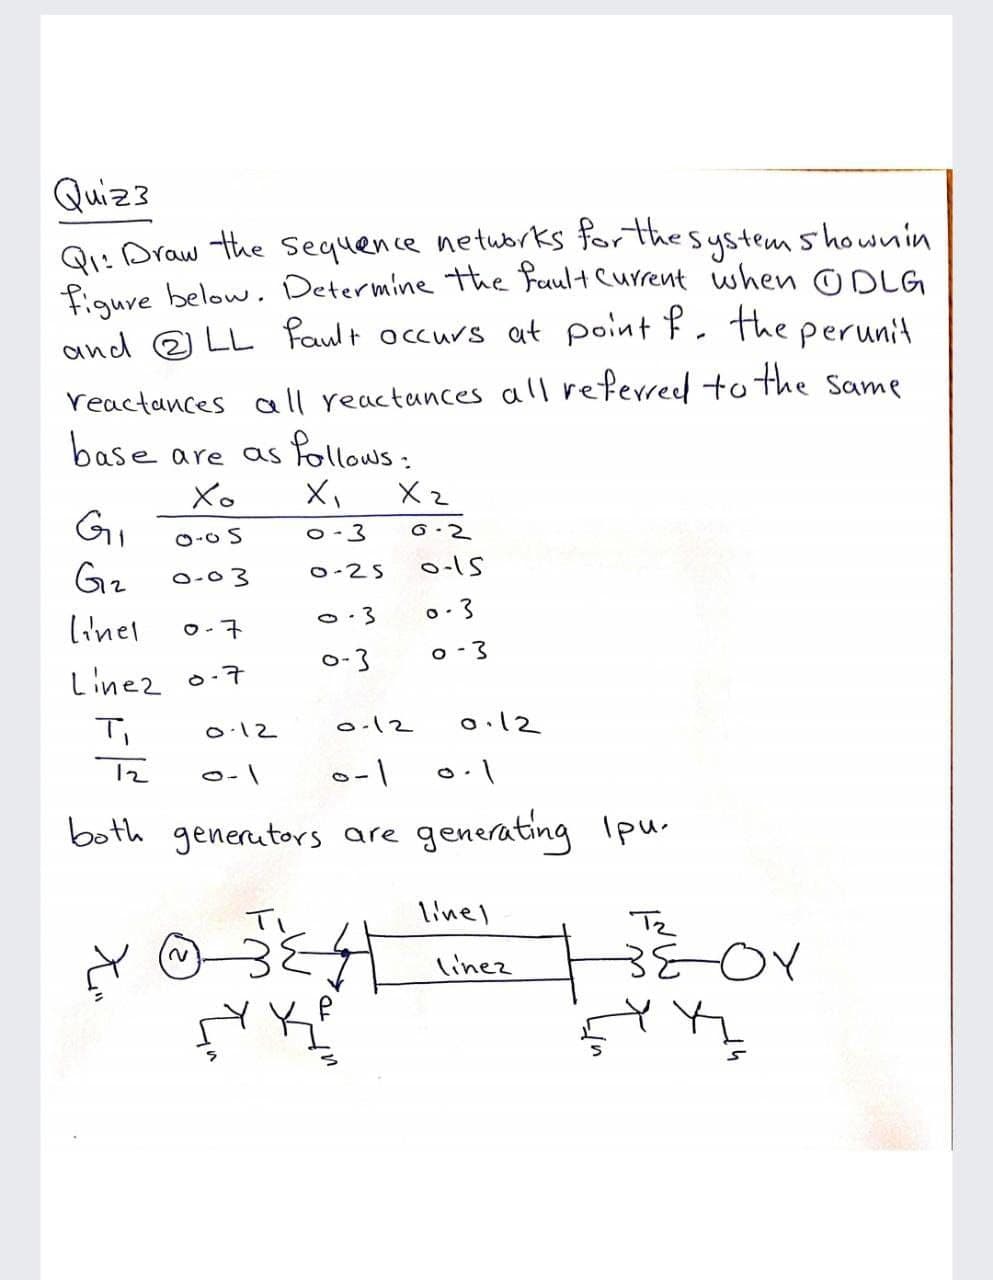 Quiz3
Qu Draw the Sequence netubrks forthesystemshownin
figuve below. Determine the Fault Current when ODLG
and @ LL Pault occurs at point P.
the
perunit
reactances call reactances all referred to the Same
base are as follows:
Xo
X2
GI
O-0 S
O-3
6-2
O-25
o-ls
O-03
o.3
o. 3
linel
O-7
o -3
o-3
Linez o-7
o.12
o.12
o:12
both generutors are generating Ipu.
line)
Tz
2.
linez
